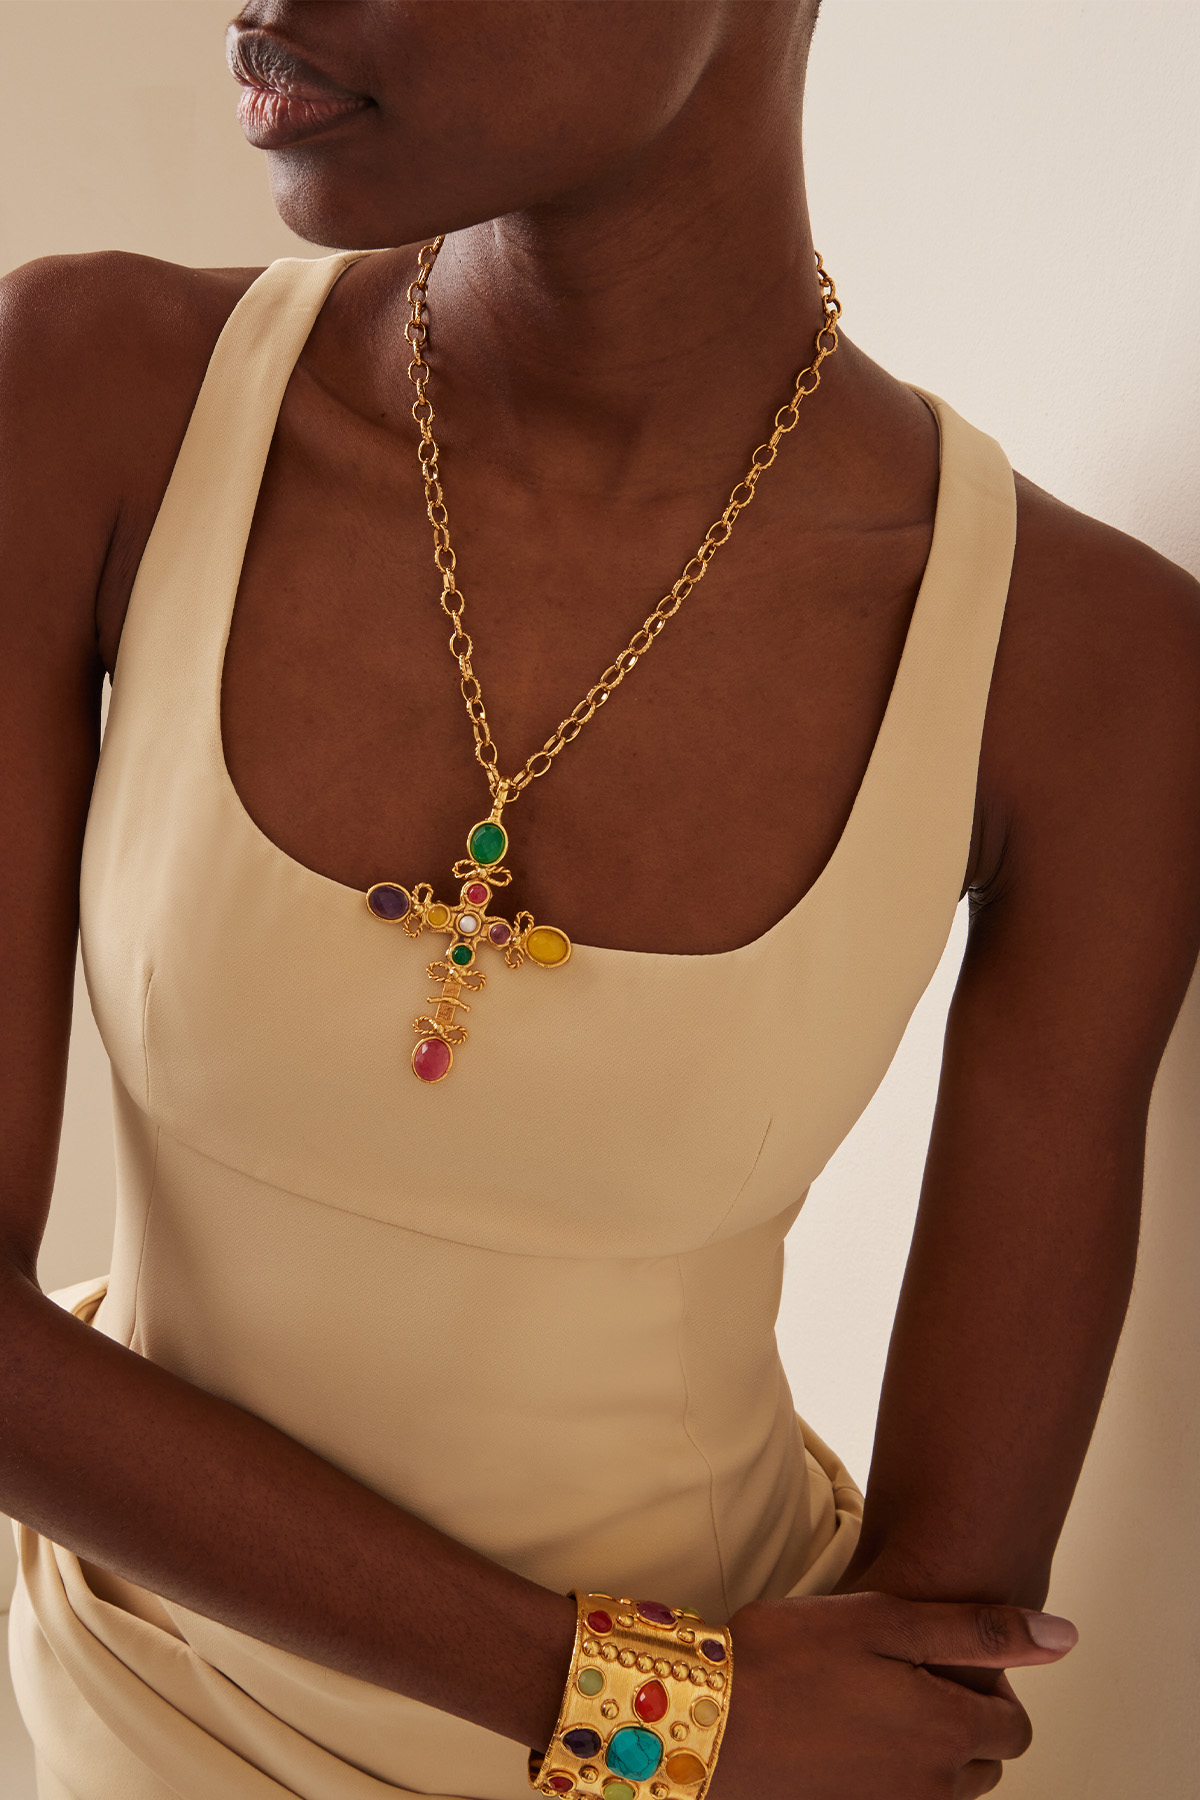 Cruise 22k Gold-Plated Multi-Stone Necklace